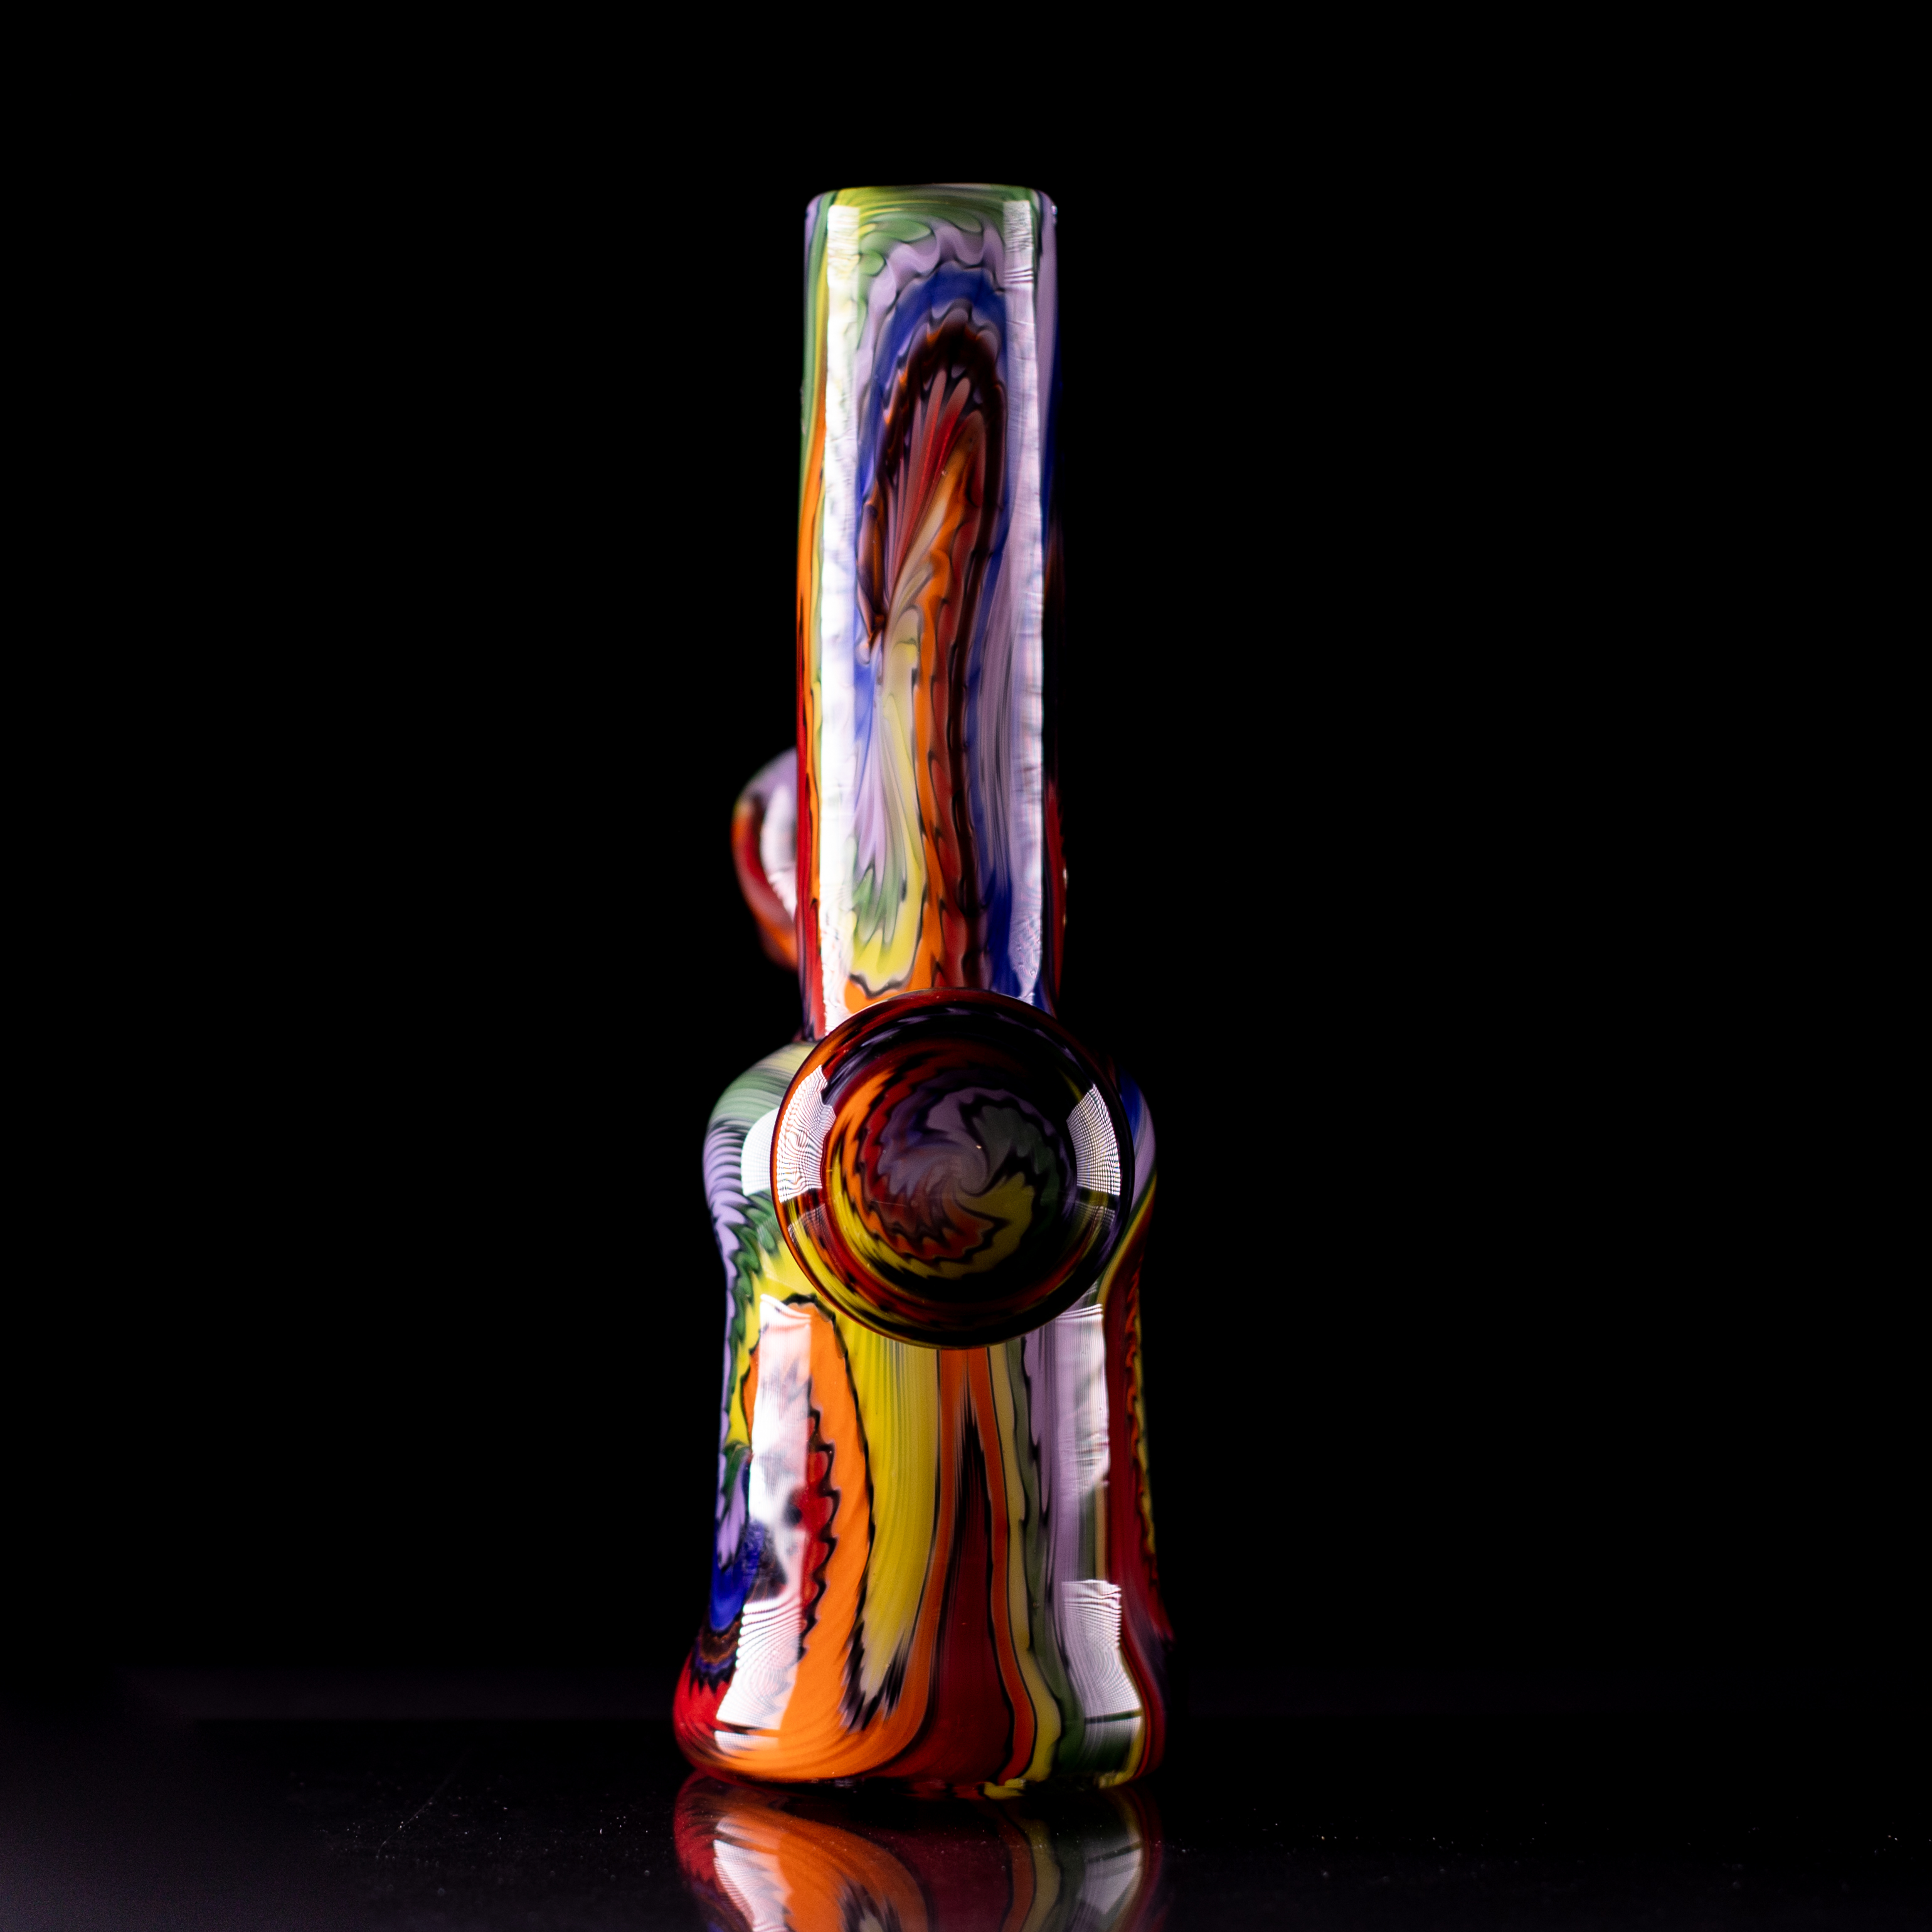 14mm Rainbow Heady Tube with Downstem and Bowl